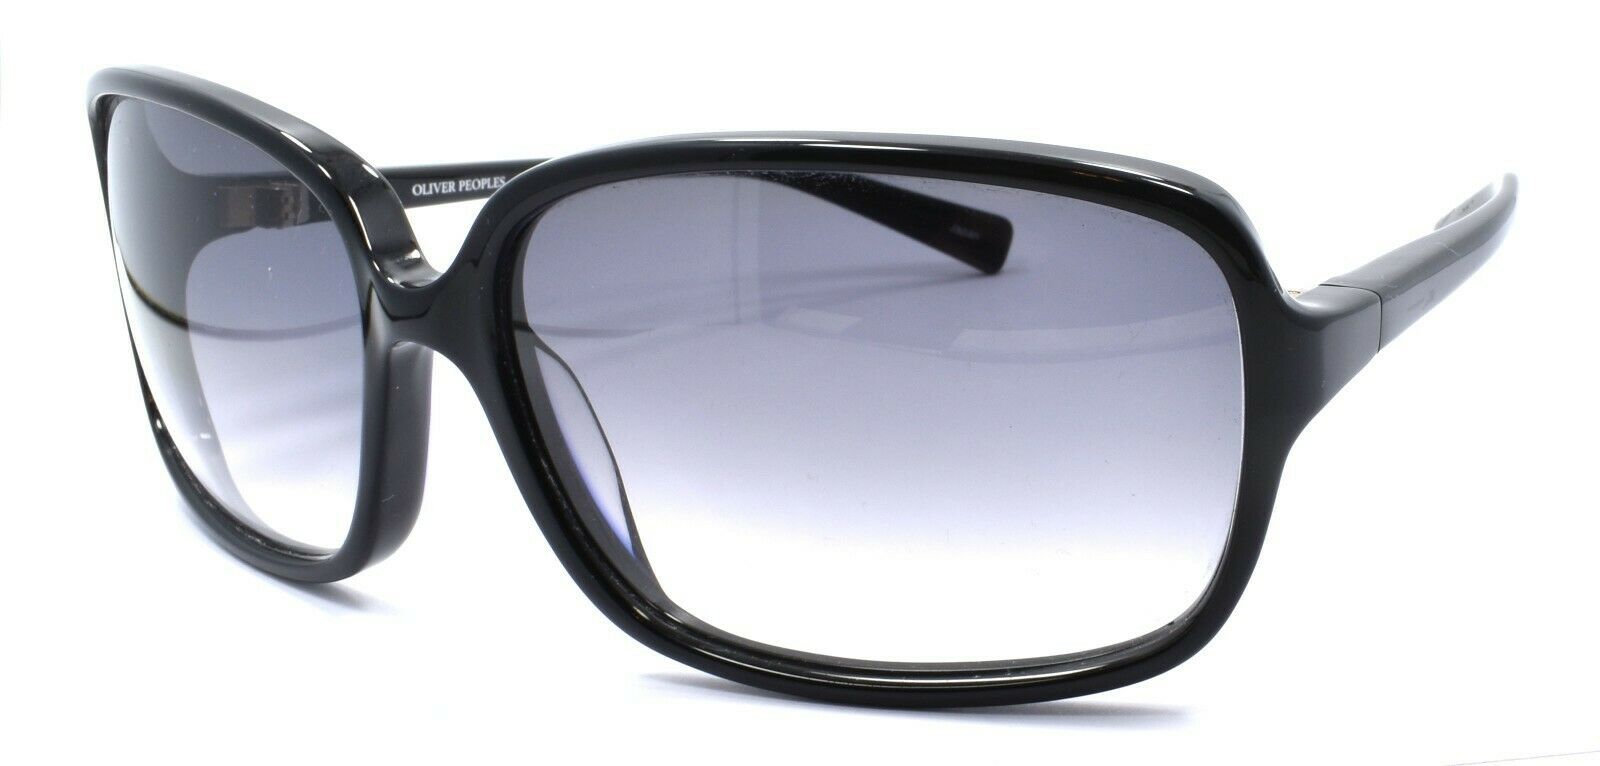 1-Oliver Peoples Bacall BK Women's Sunglasses Black / Gray Gradient JAPAN-Does not apply-IKSpecs